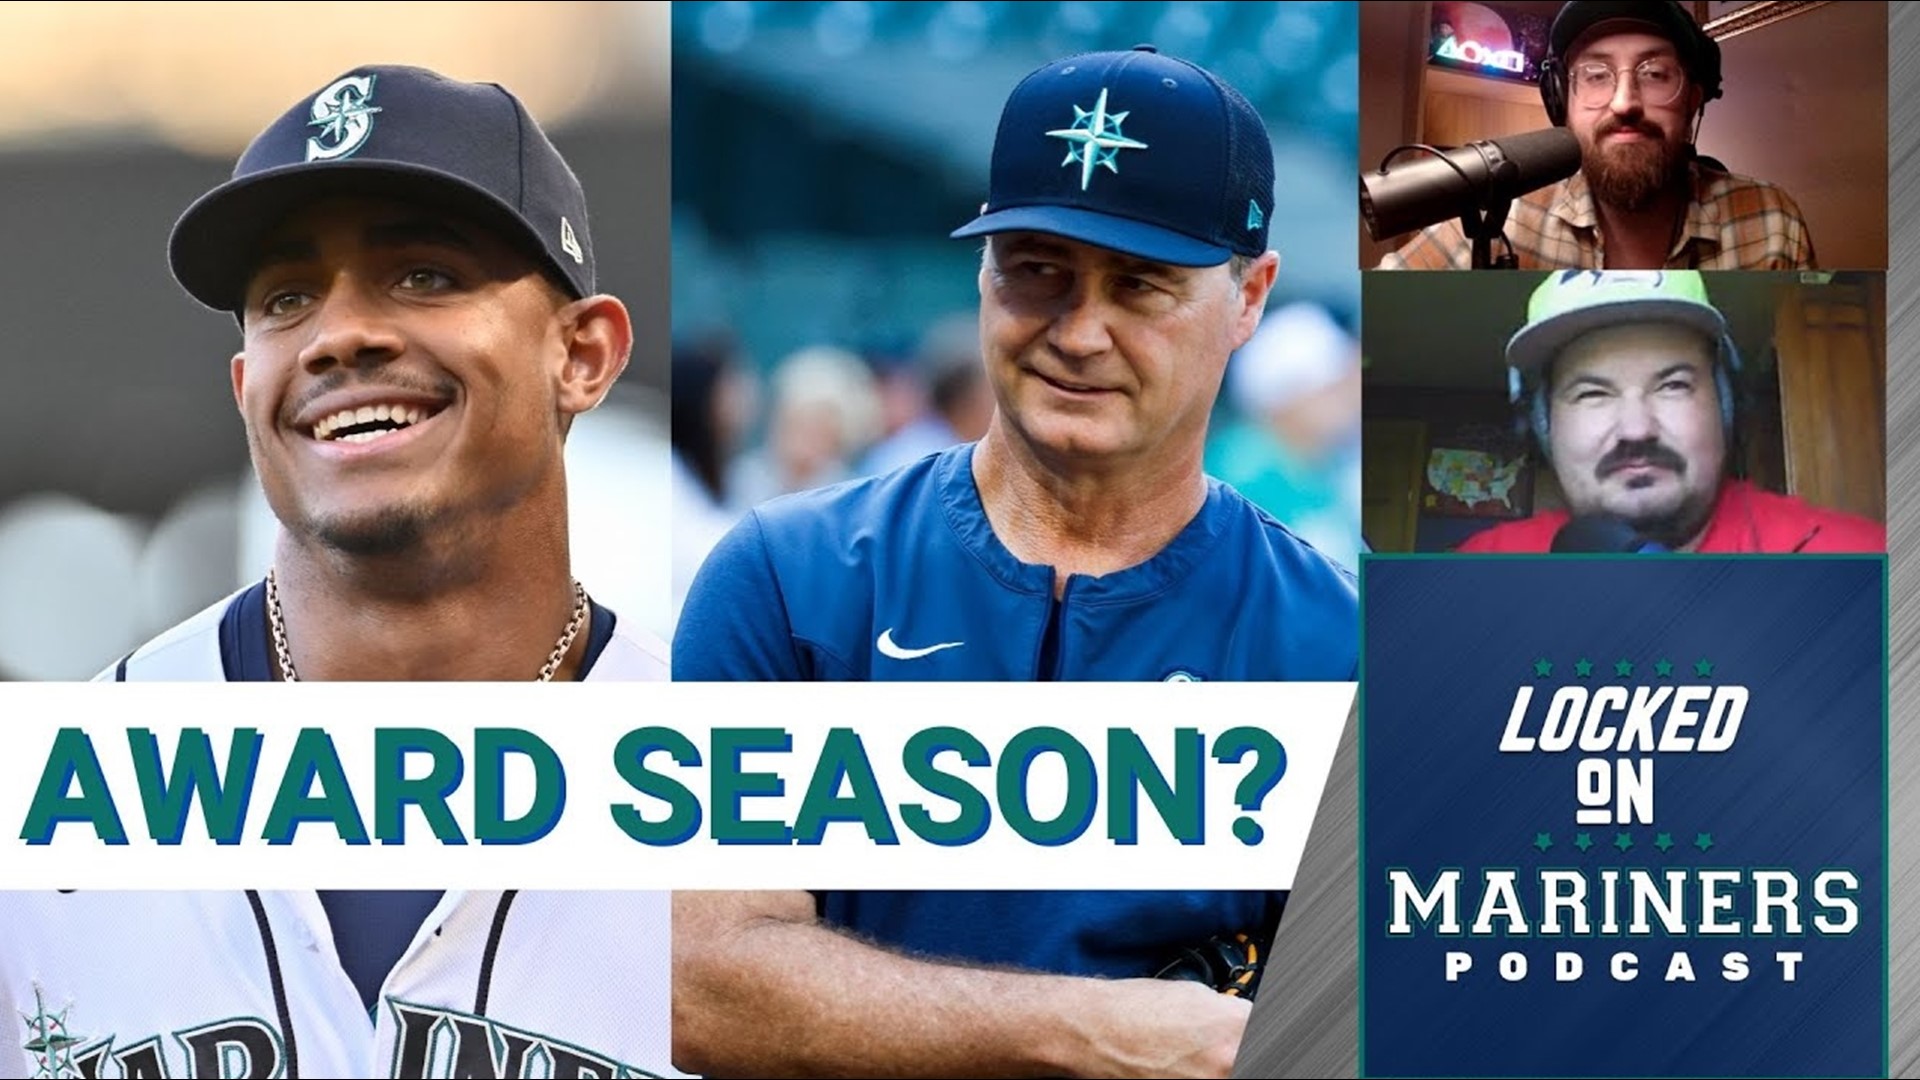 Colby and Ty discuss the chances that Julio Rodriguez wins the Rookie of the Year and whether Scott Servais will get robbed of the manager of the year title again.